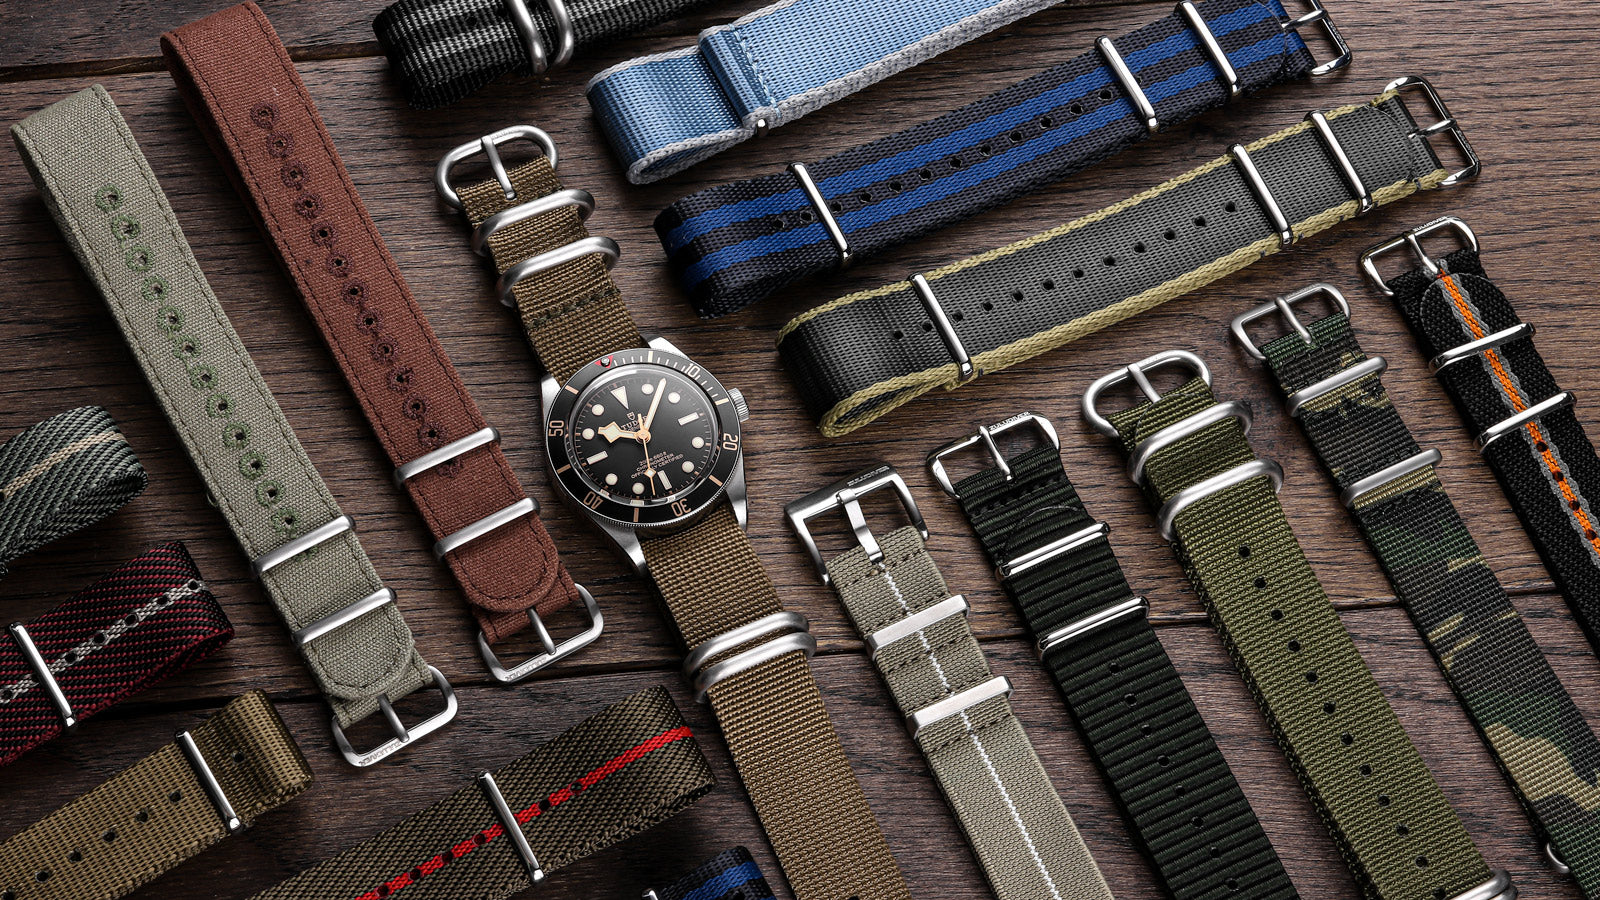 NATO watch strap, grey seatbelt nylon material fitted to a mechanical Bell & Ross automatic movement watch